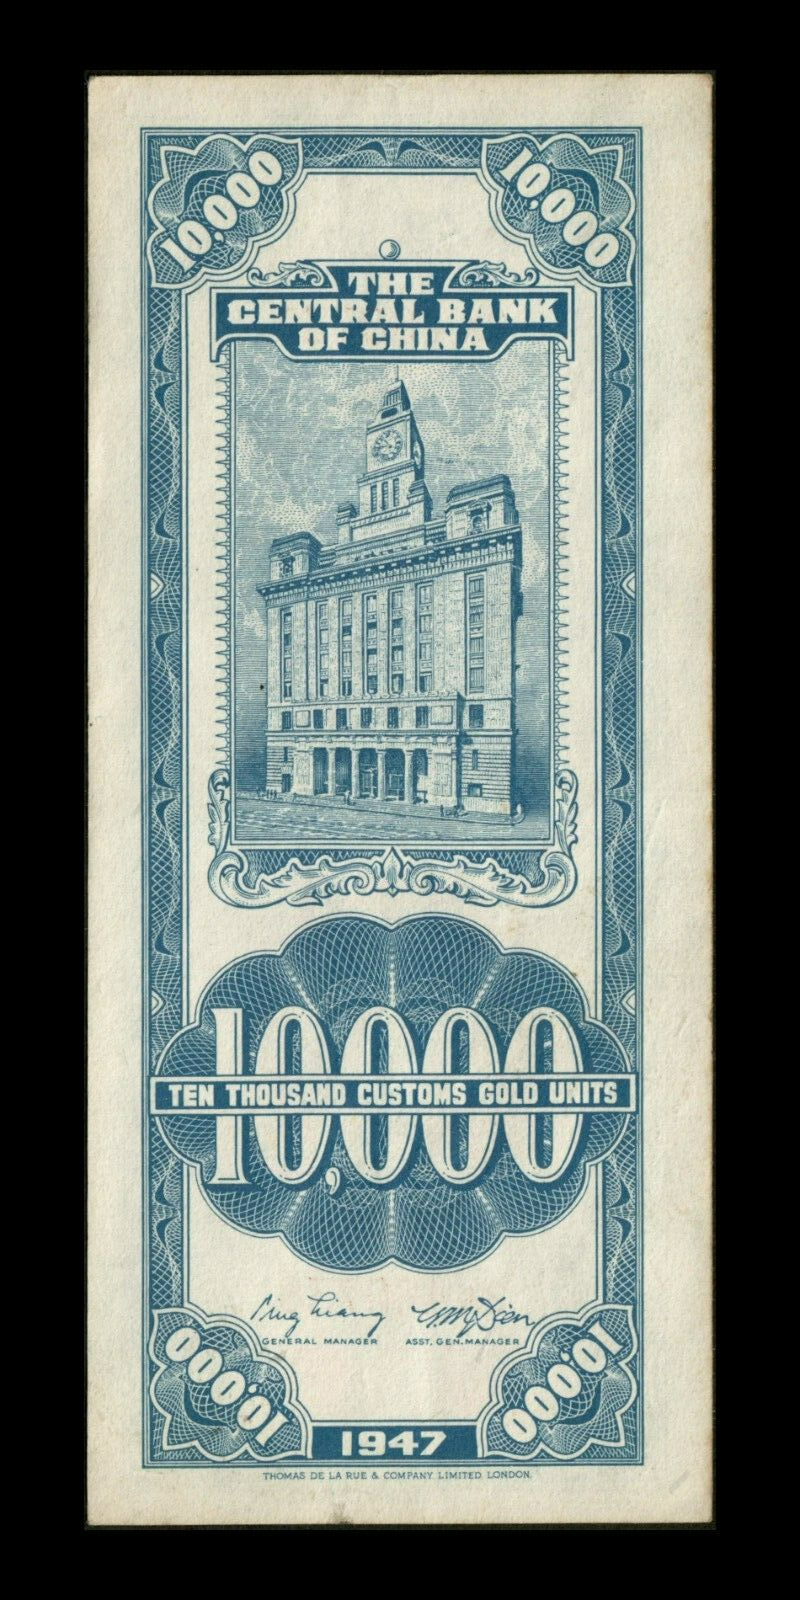 CHINE - Central Bank of China, 10000 Customs Gold Units 1947 P.354 SUP+ / XF+